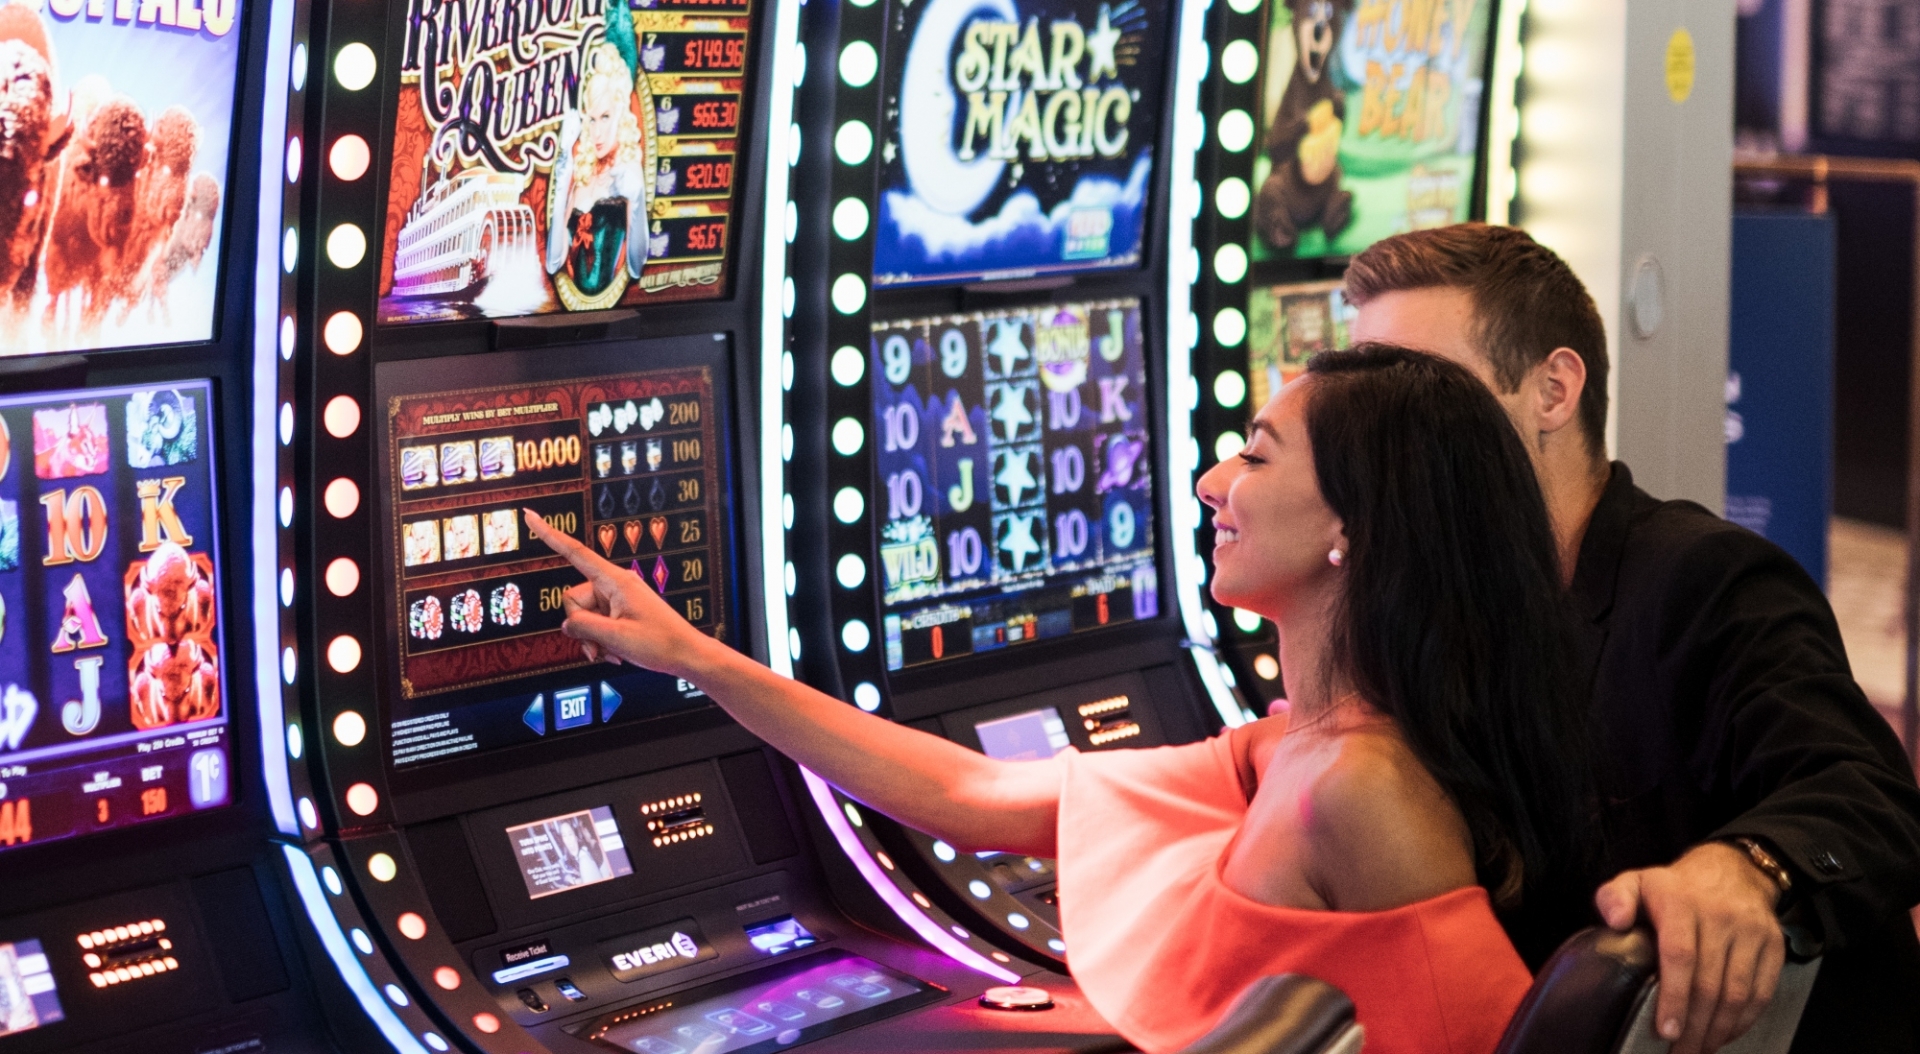 Capture Unforgettable Gaming Moments: AFB Gaming Slots Leave a Lasting Impression